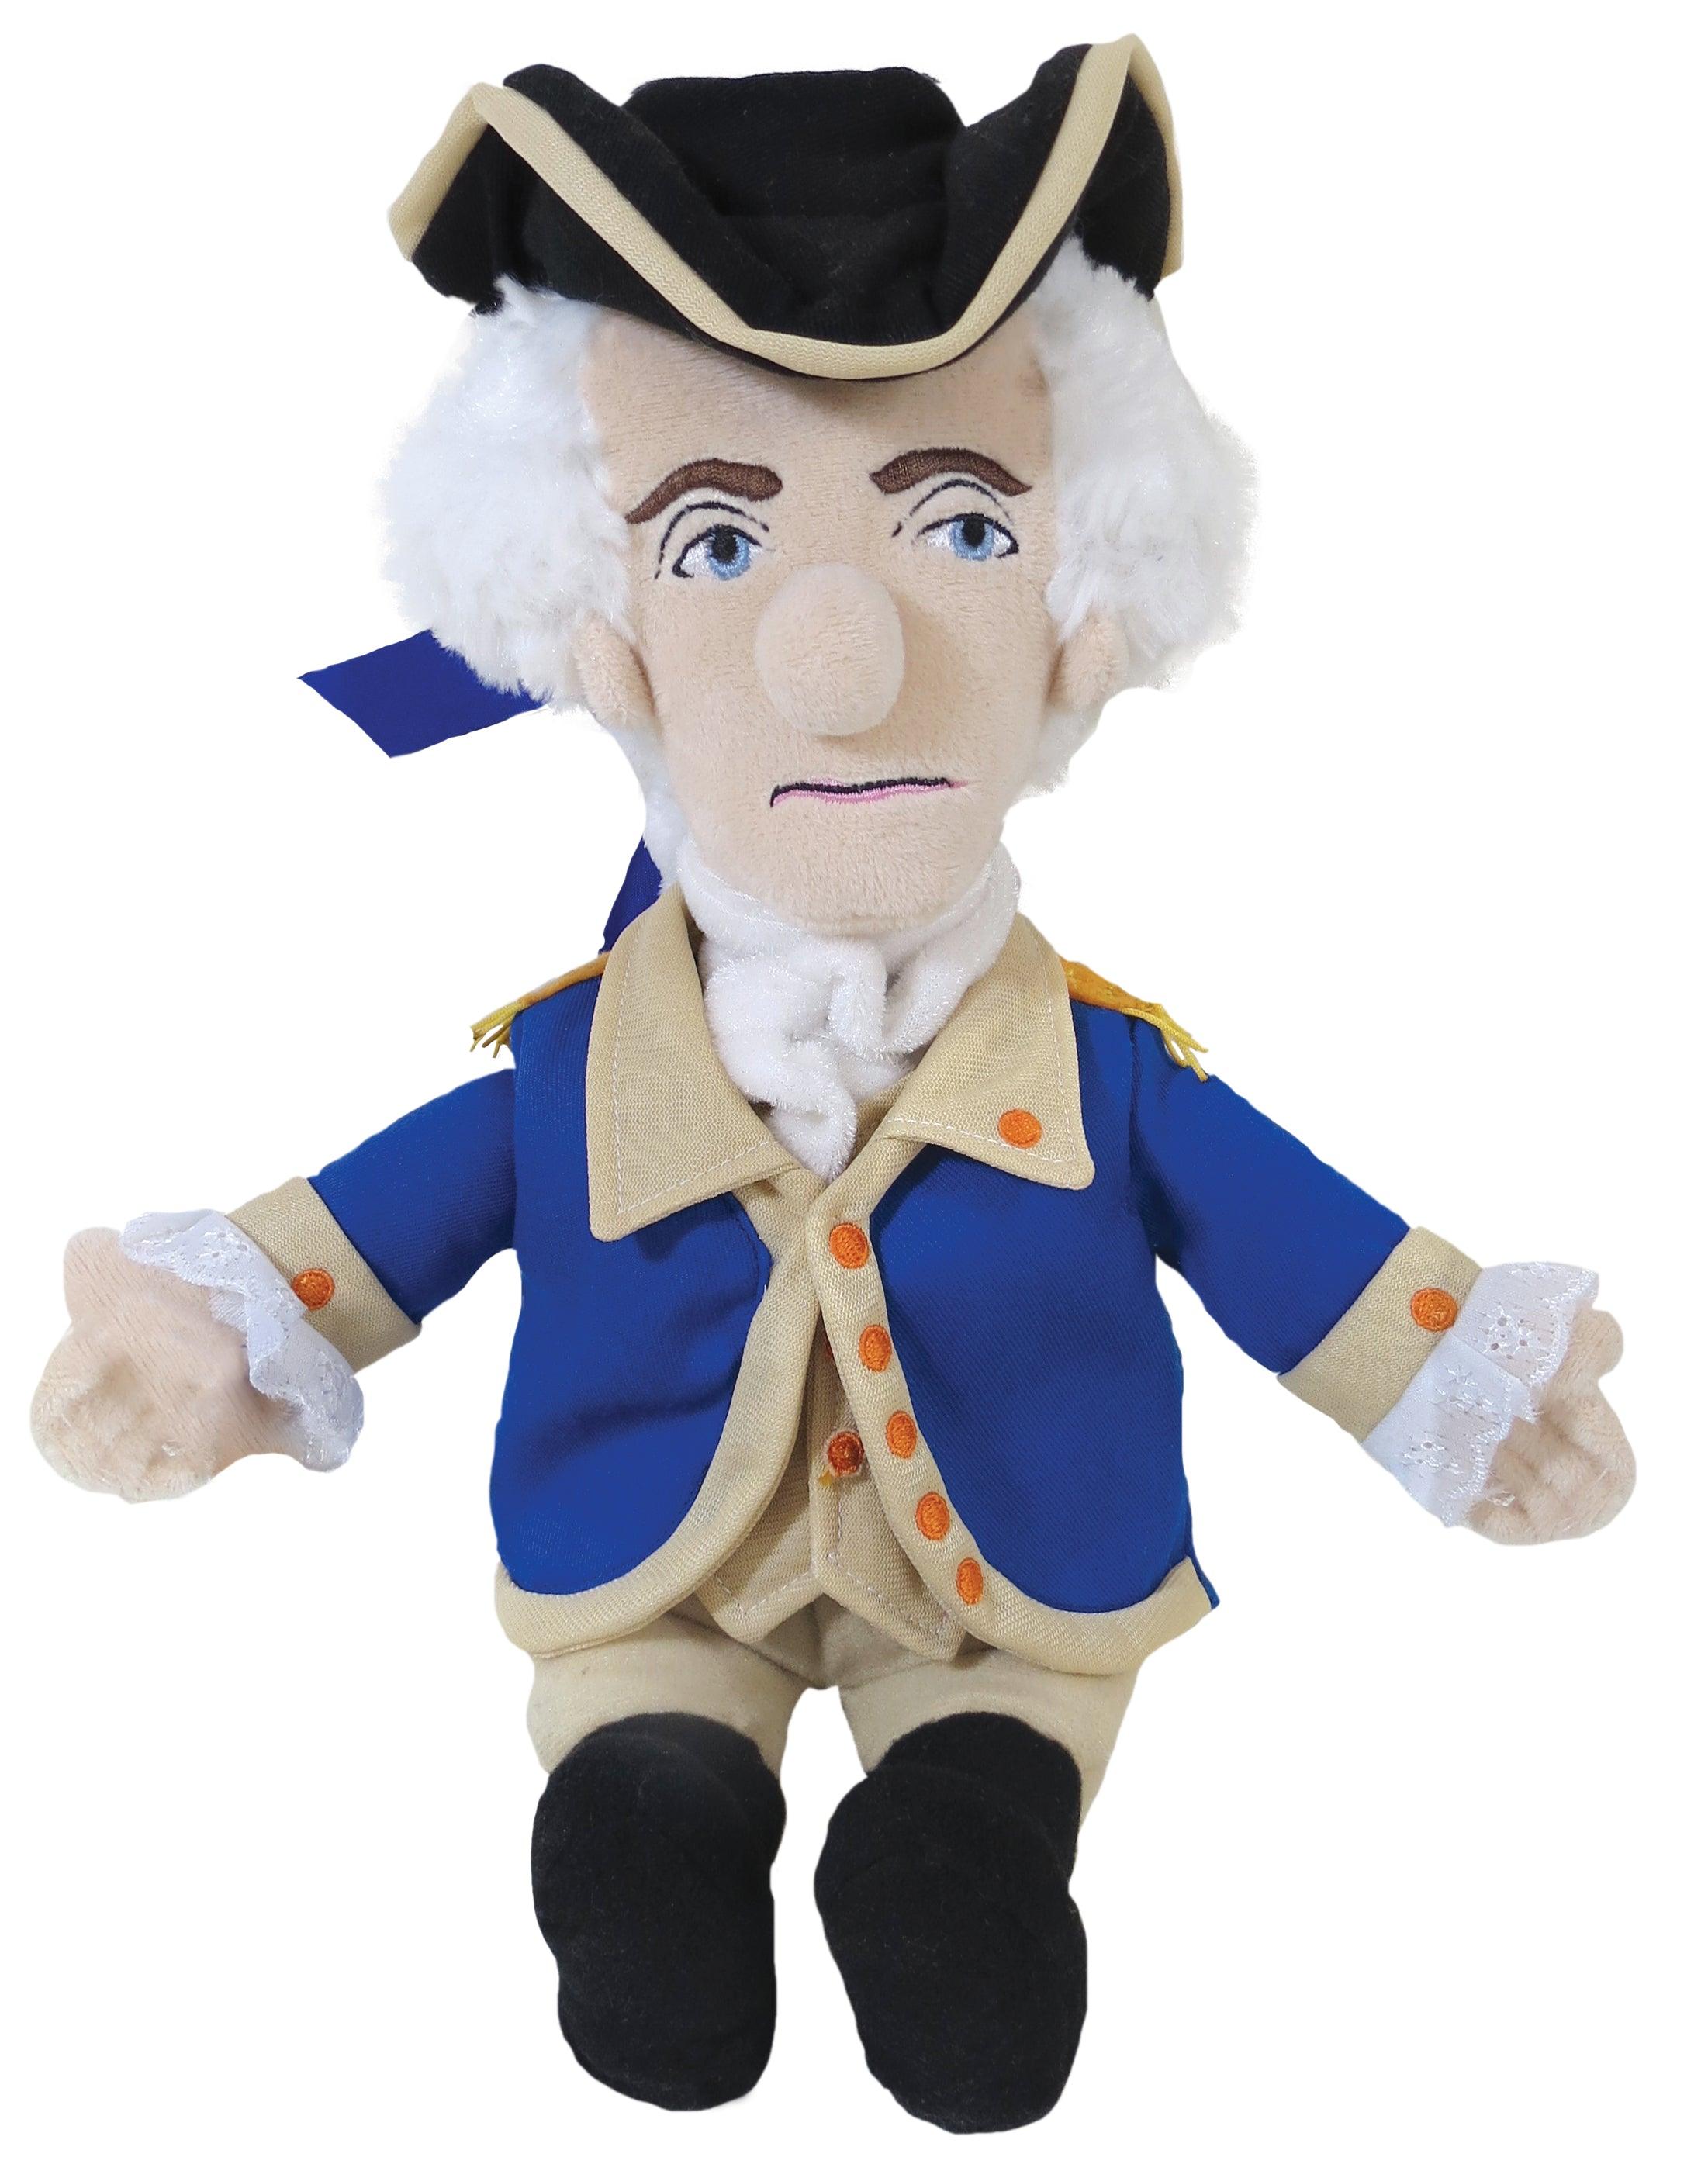 George Washington Plush Doll  Smart and Funny Gifts by UPG – The